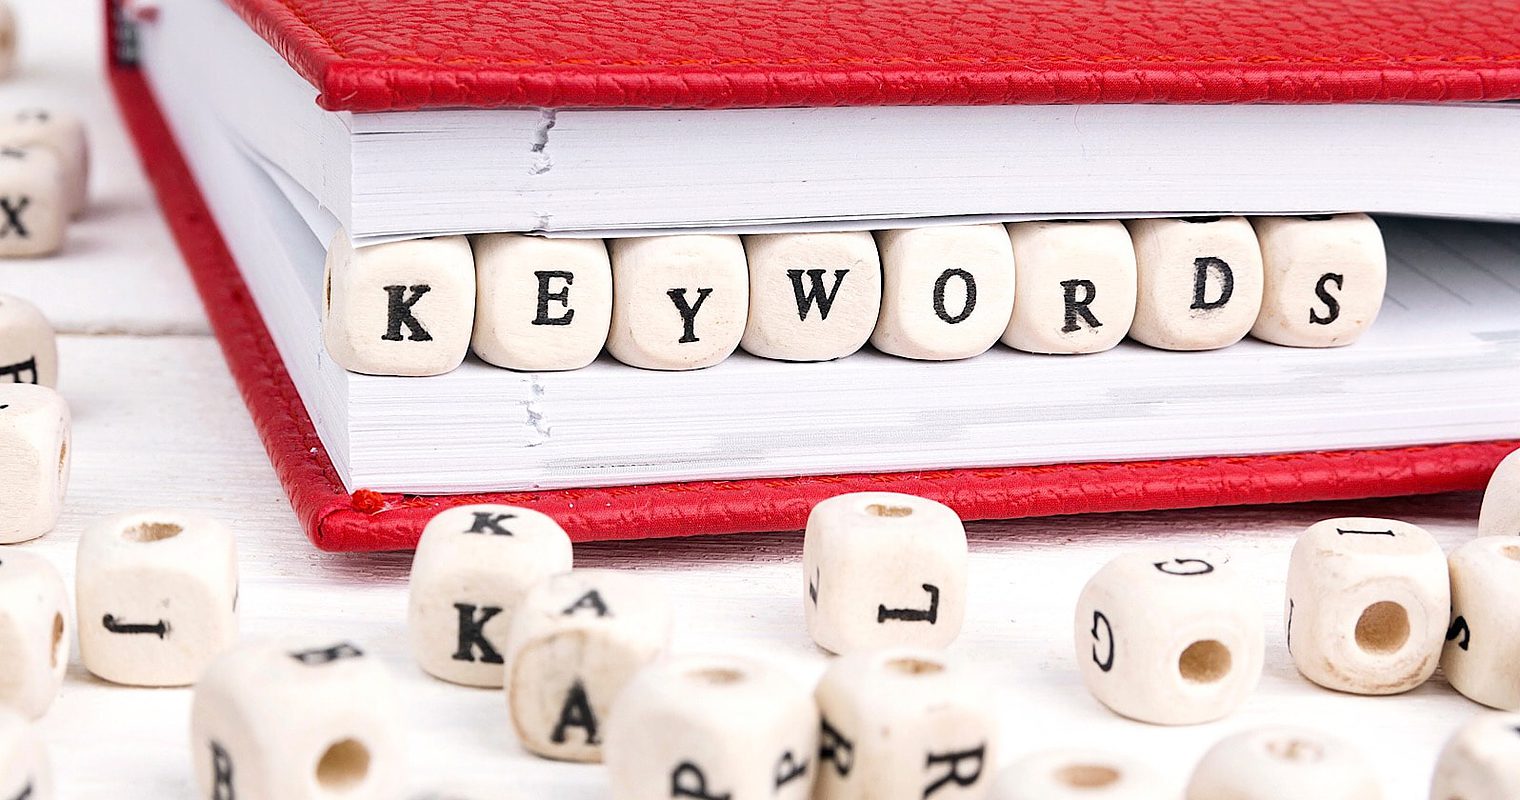 Google May Ignore Keyword Stuffing if Content Has Value